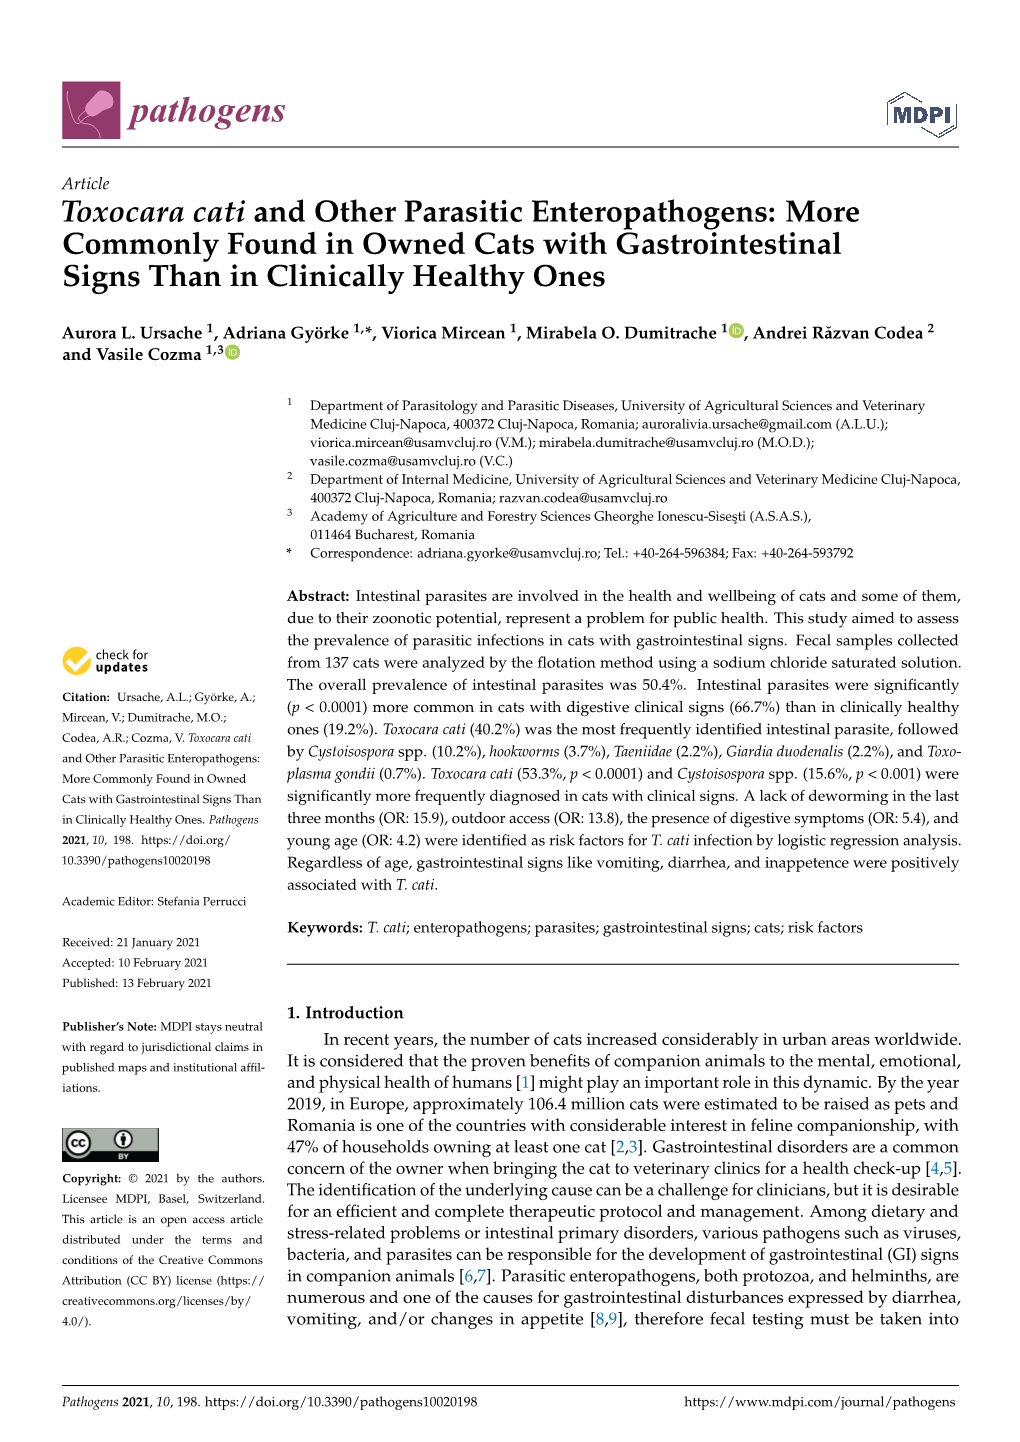 Toxocara Cati and Other Parasitic Enteropathogens: More Commonly Found in Owned Cats with Gastrointestinal Signs Than in Clinically Healthy Ones